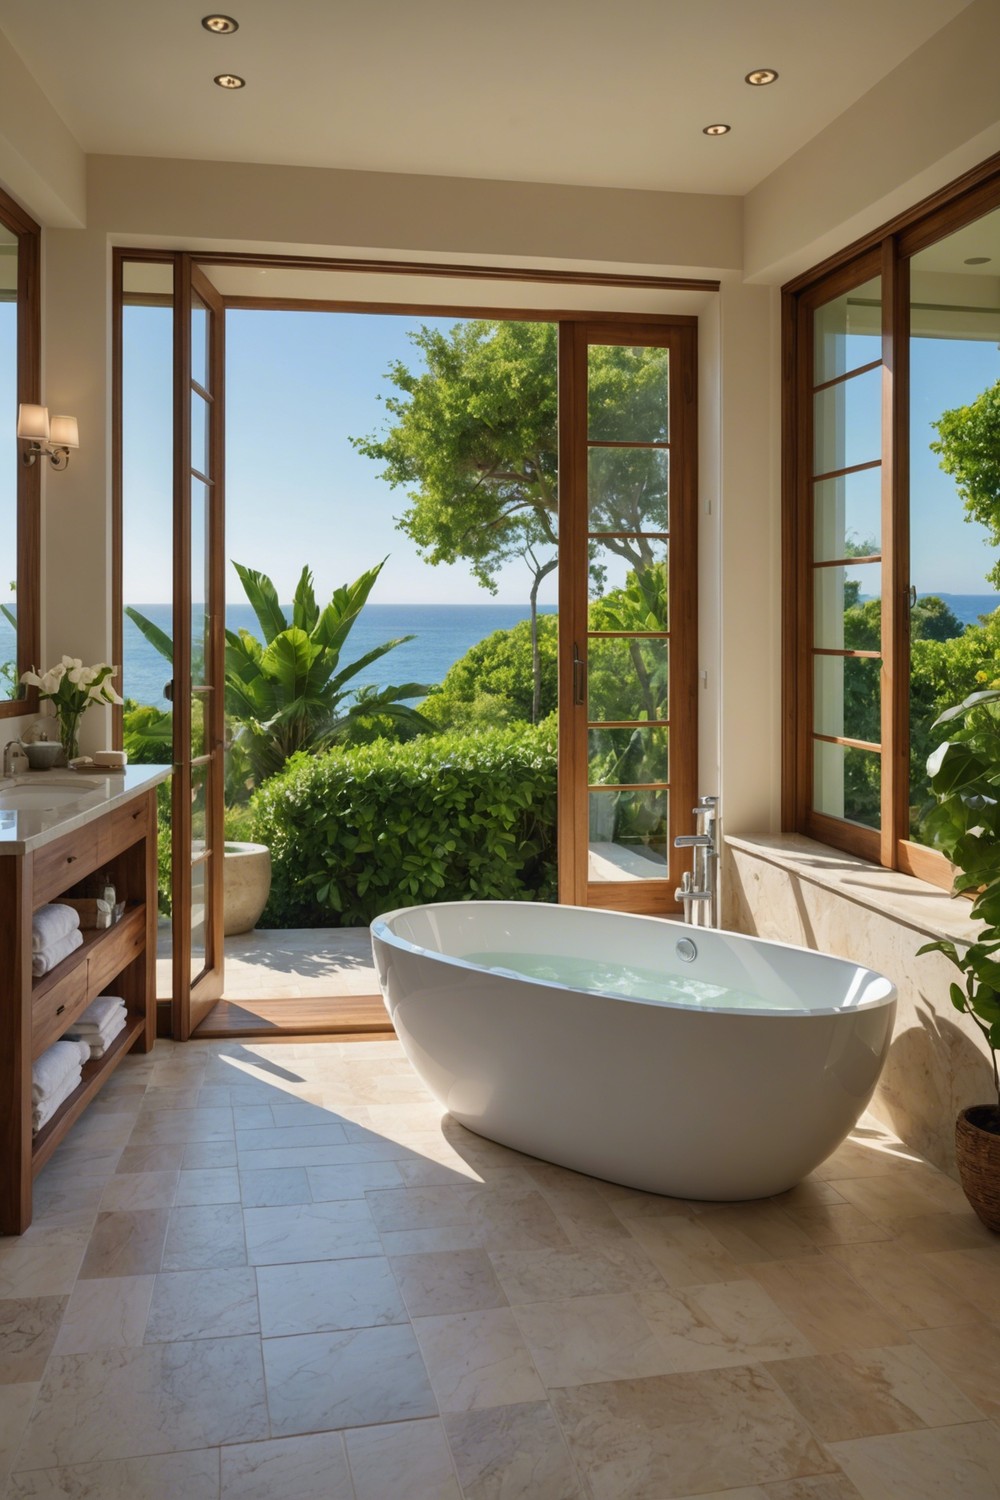 Freestanding Tubs with a View